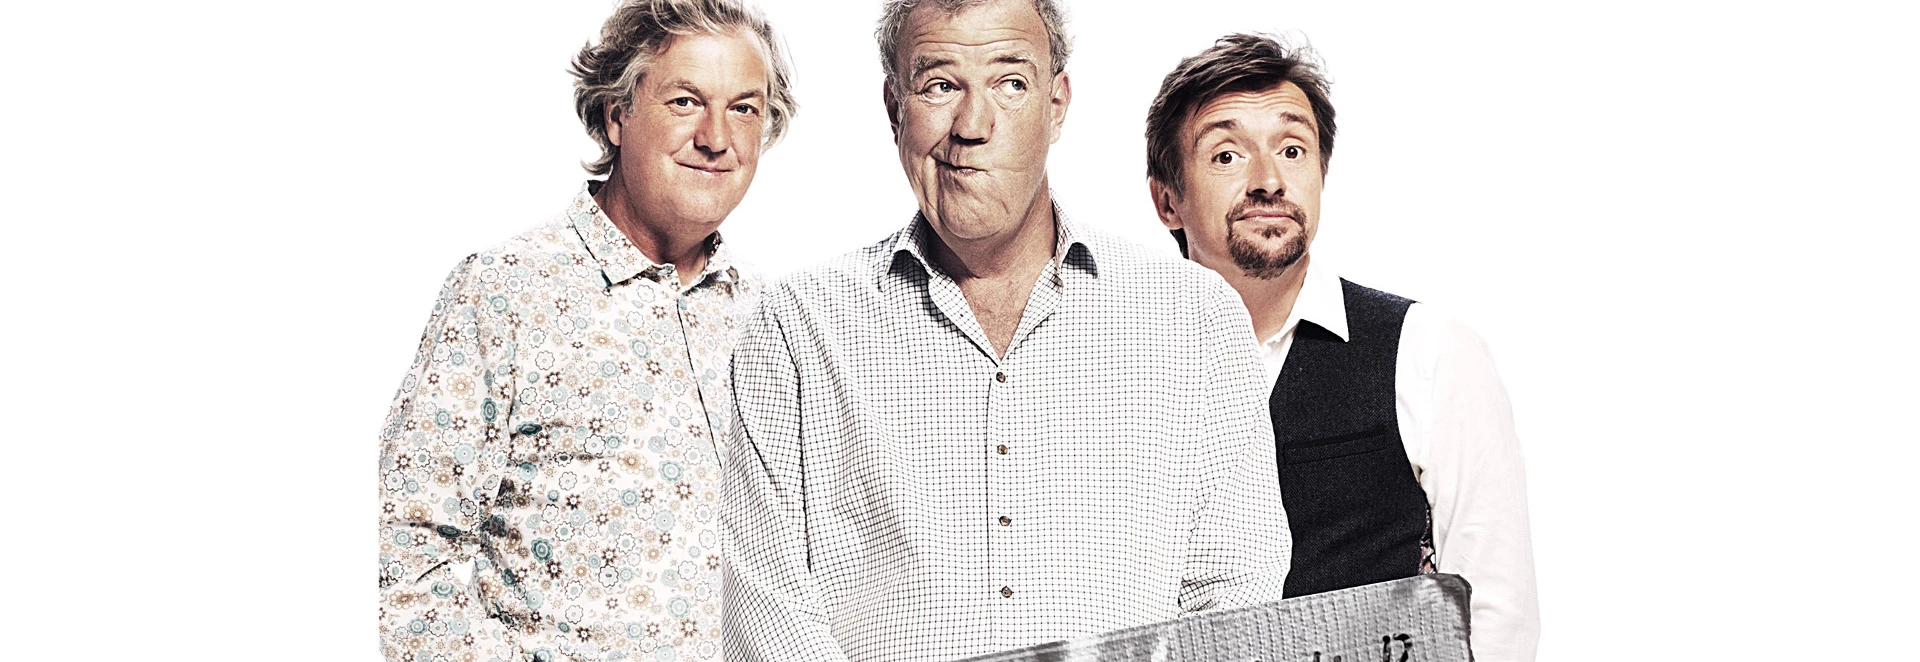 The Grand Tour is officially the most illegally-downloaded show in history 